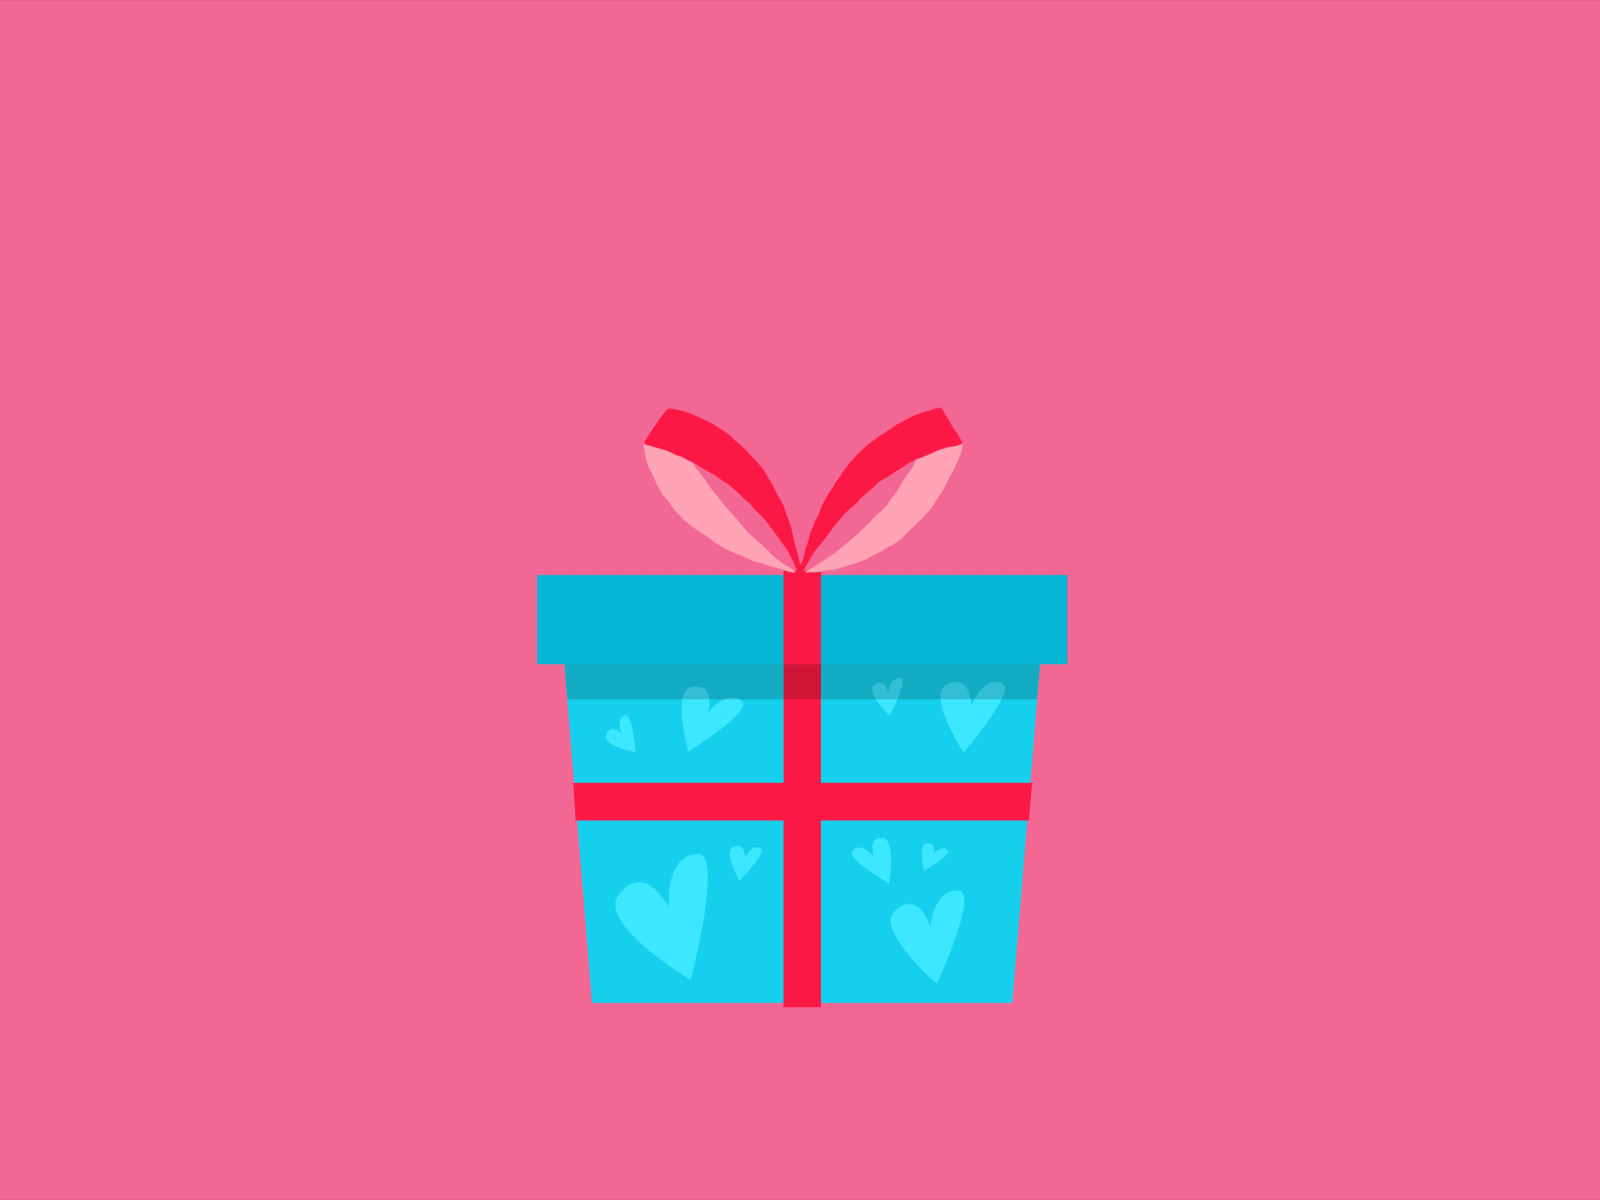 Surprise Gift | Motion graphics design, Surprise gifts, Animation tutorial